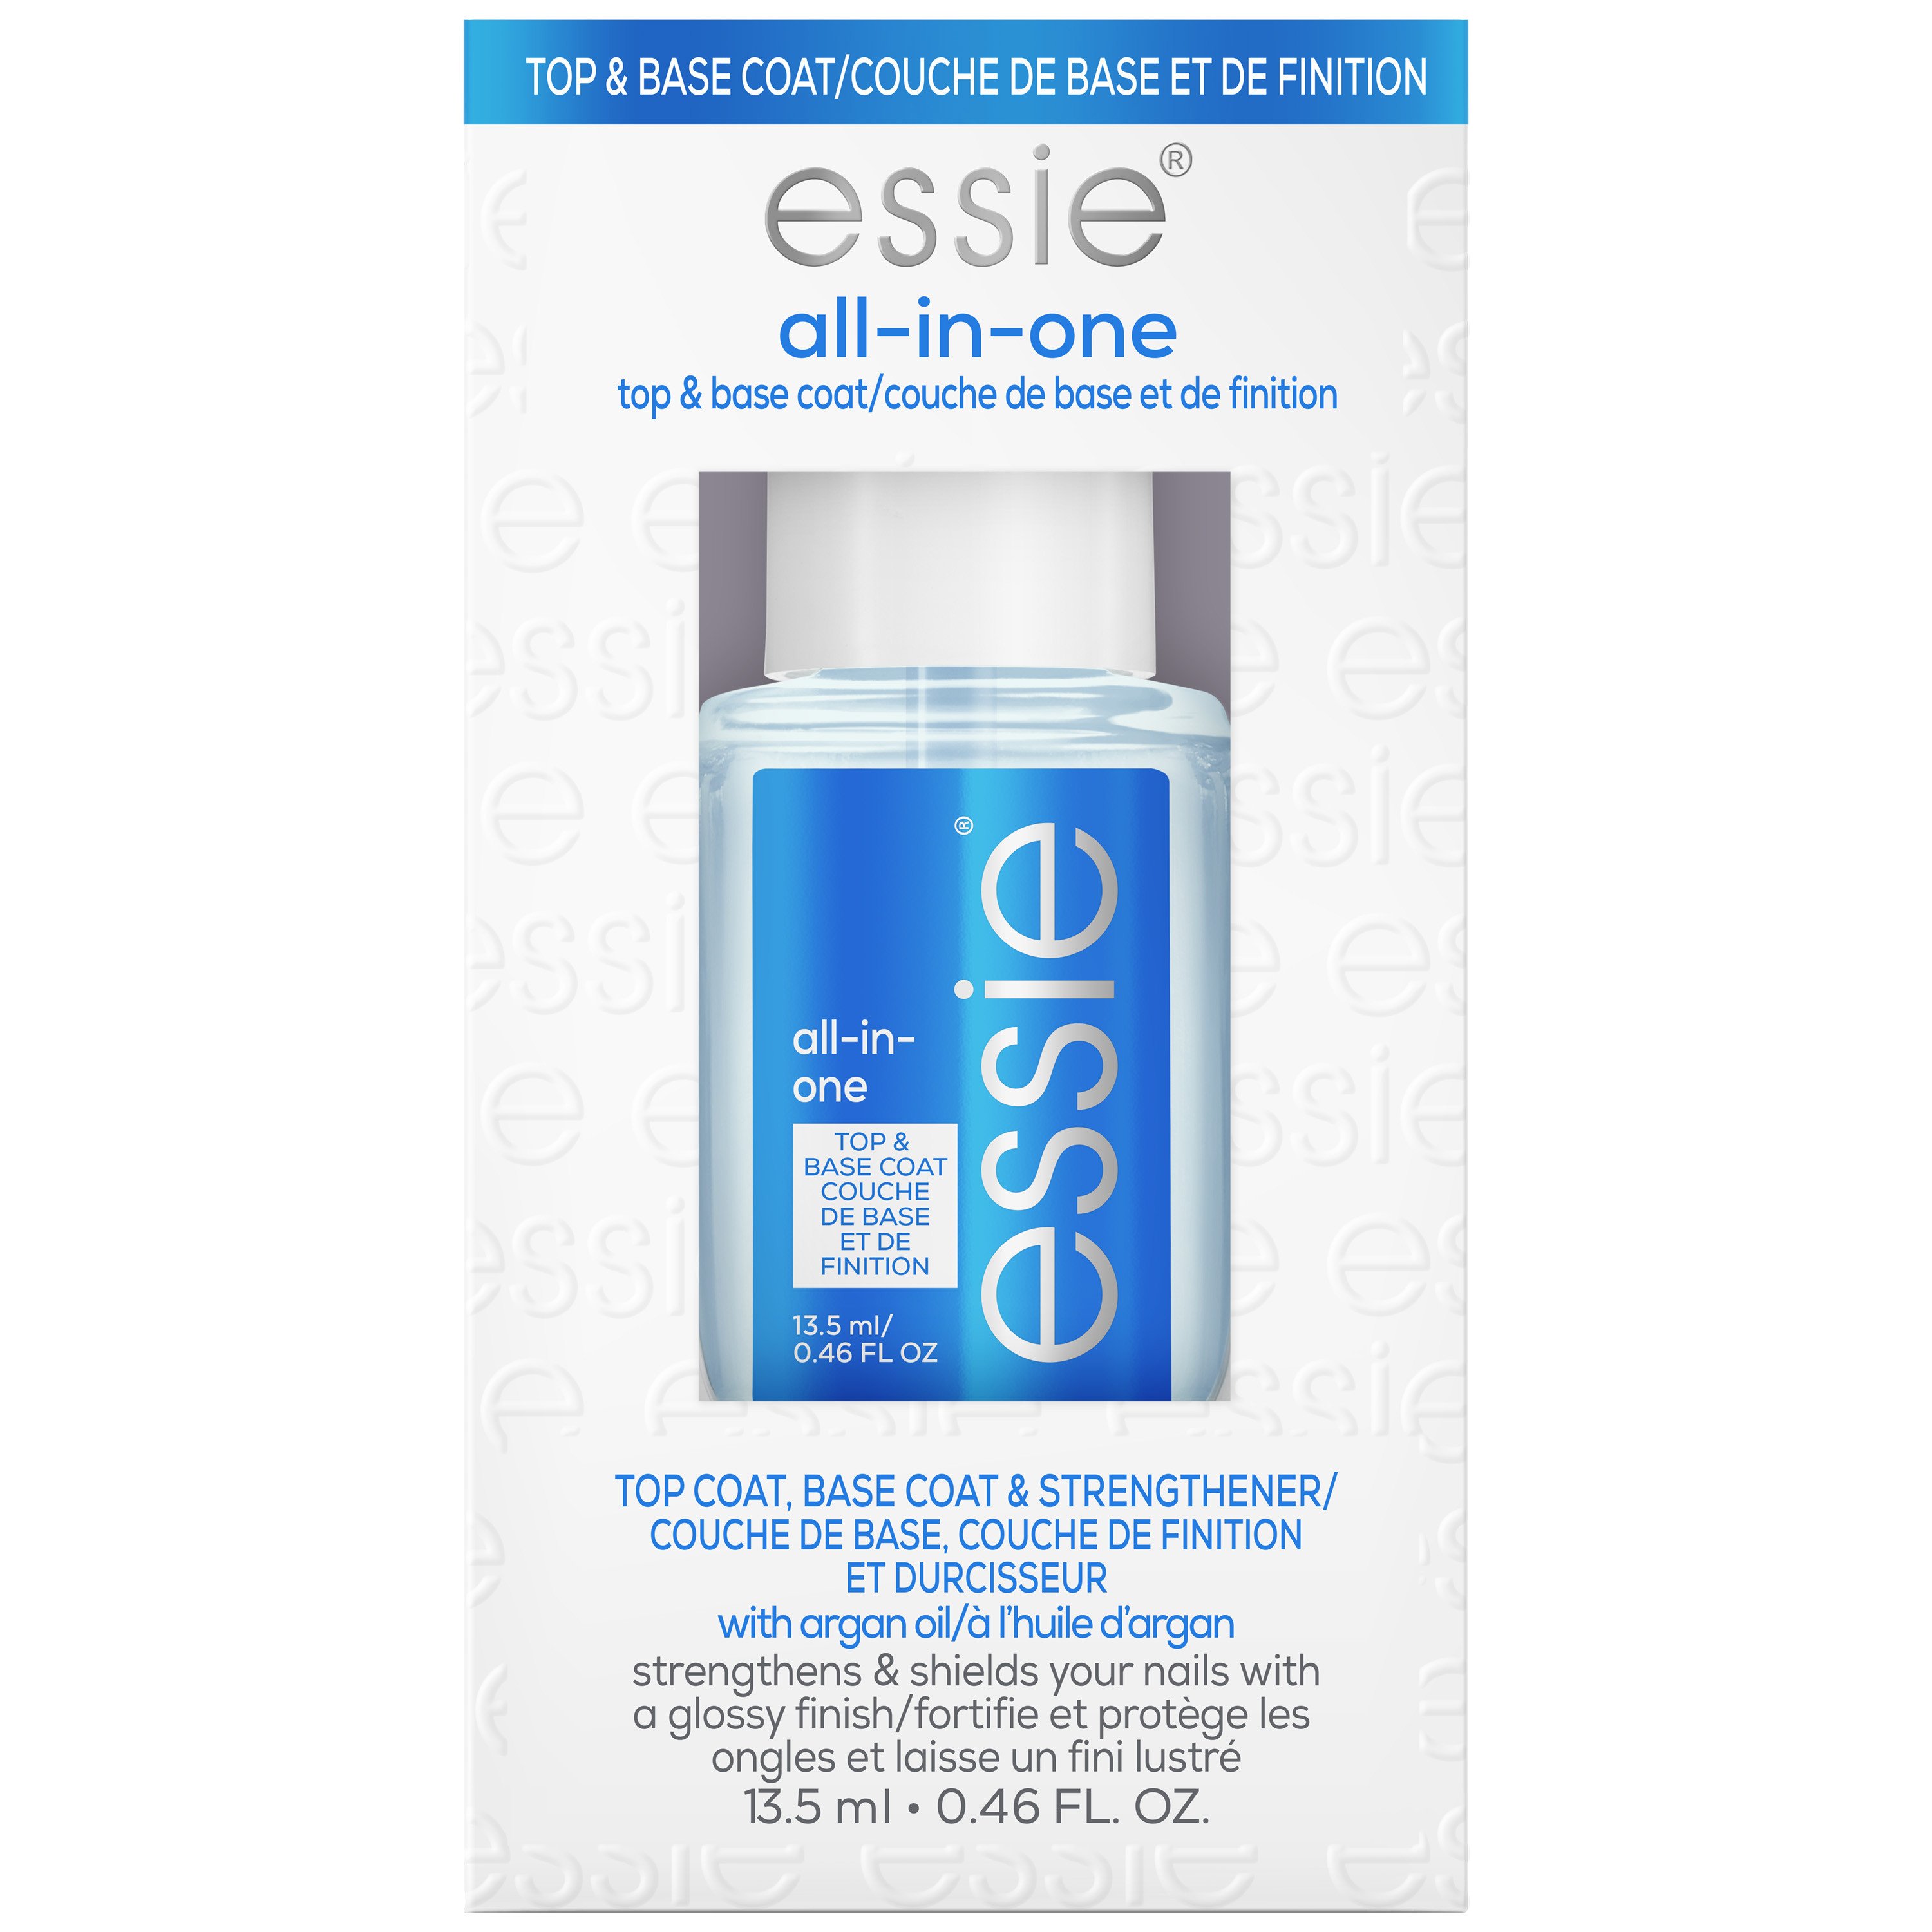 essie All In One Base Strengthener Nail at Coat Top + Shop H-E-B Treatments + Treatment 